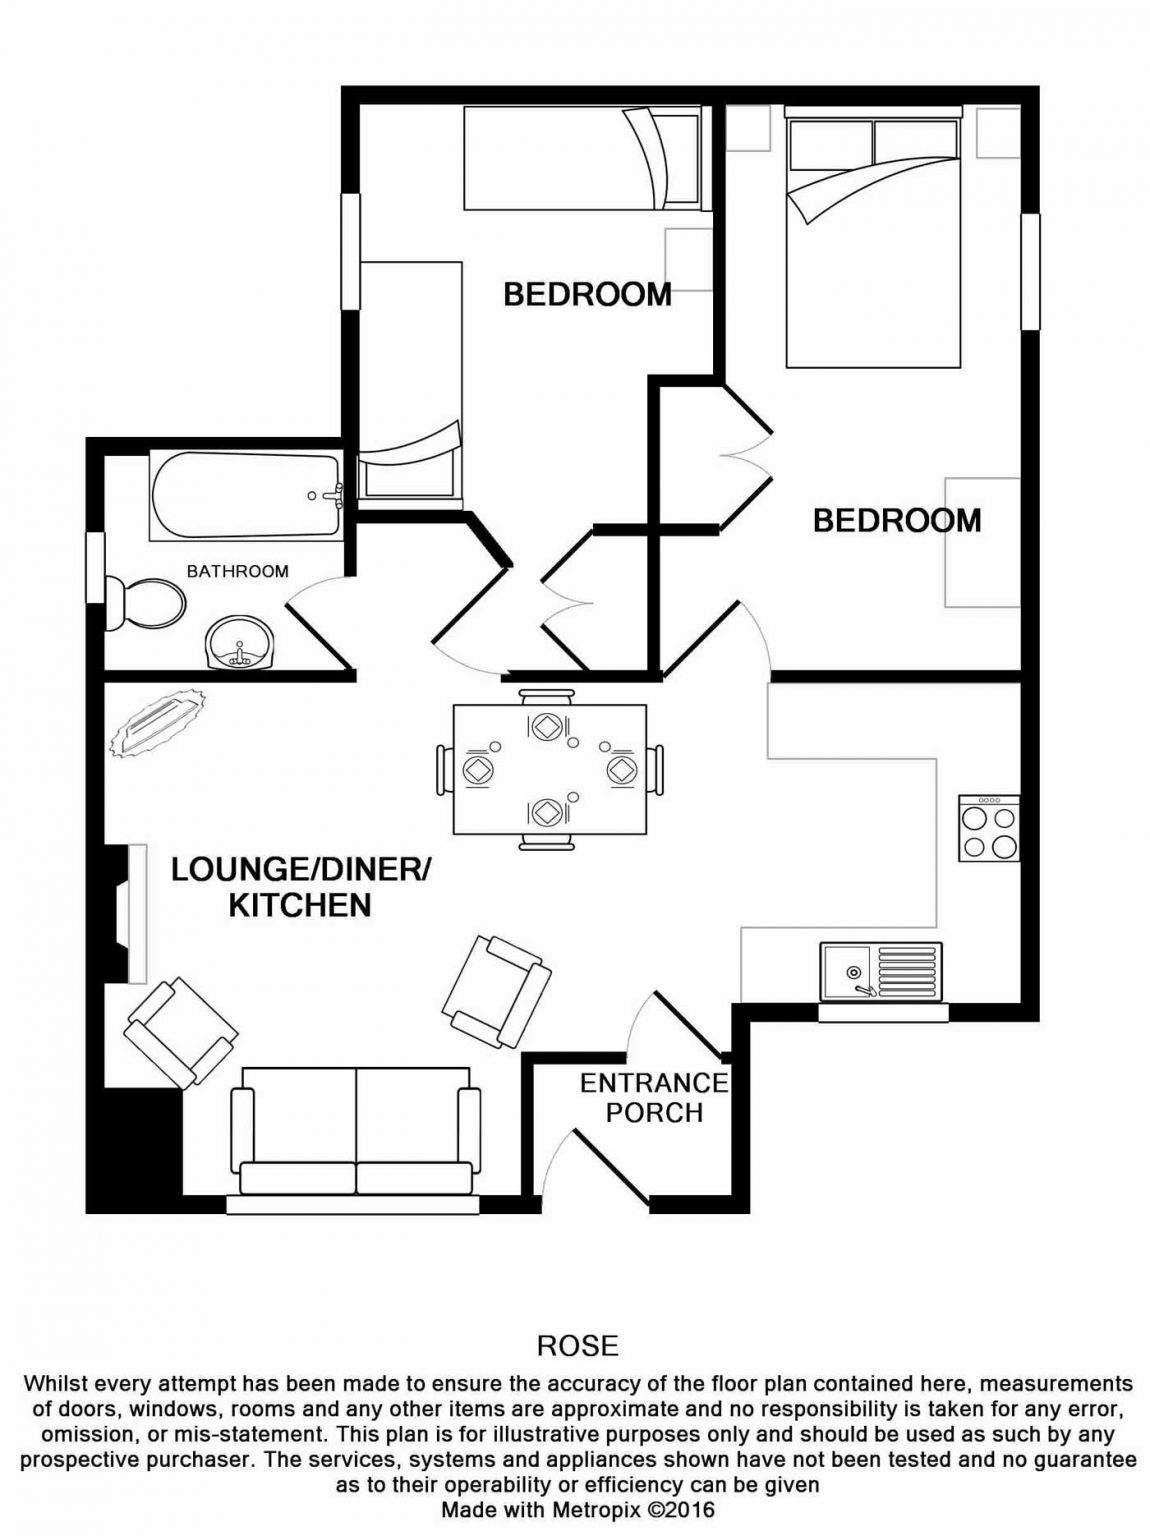 Rose Floor Plan Luxury Self Catering Holiday Cottages in